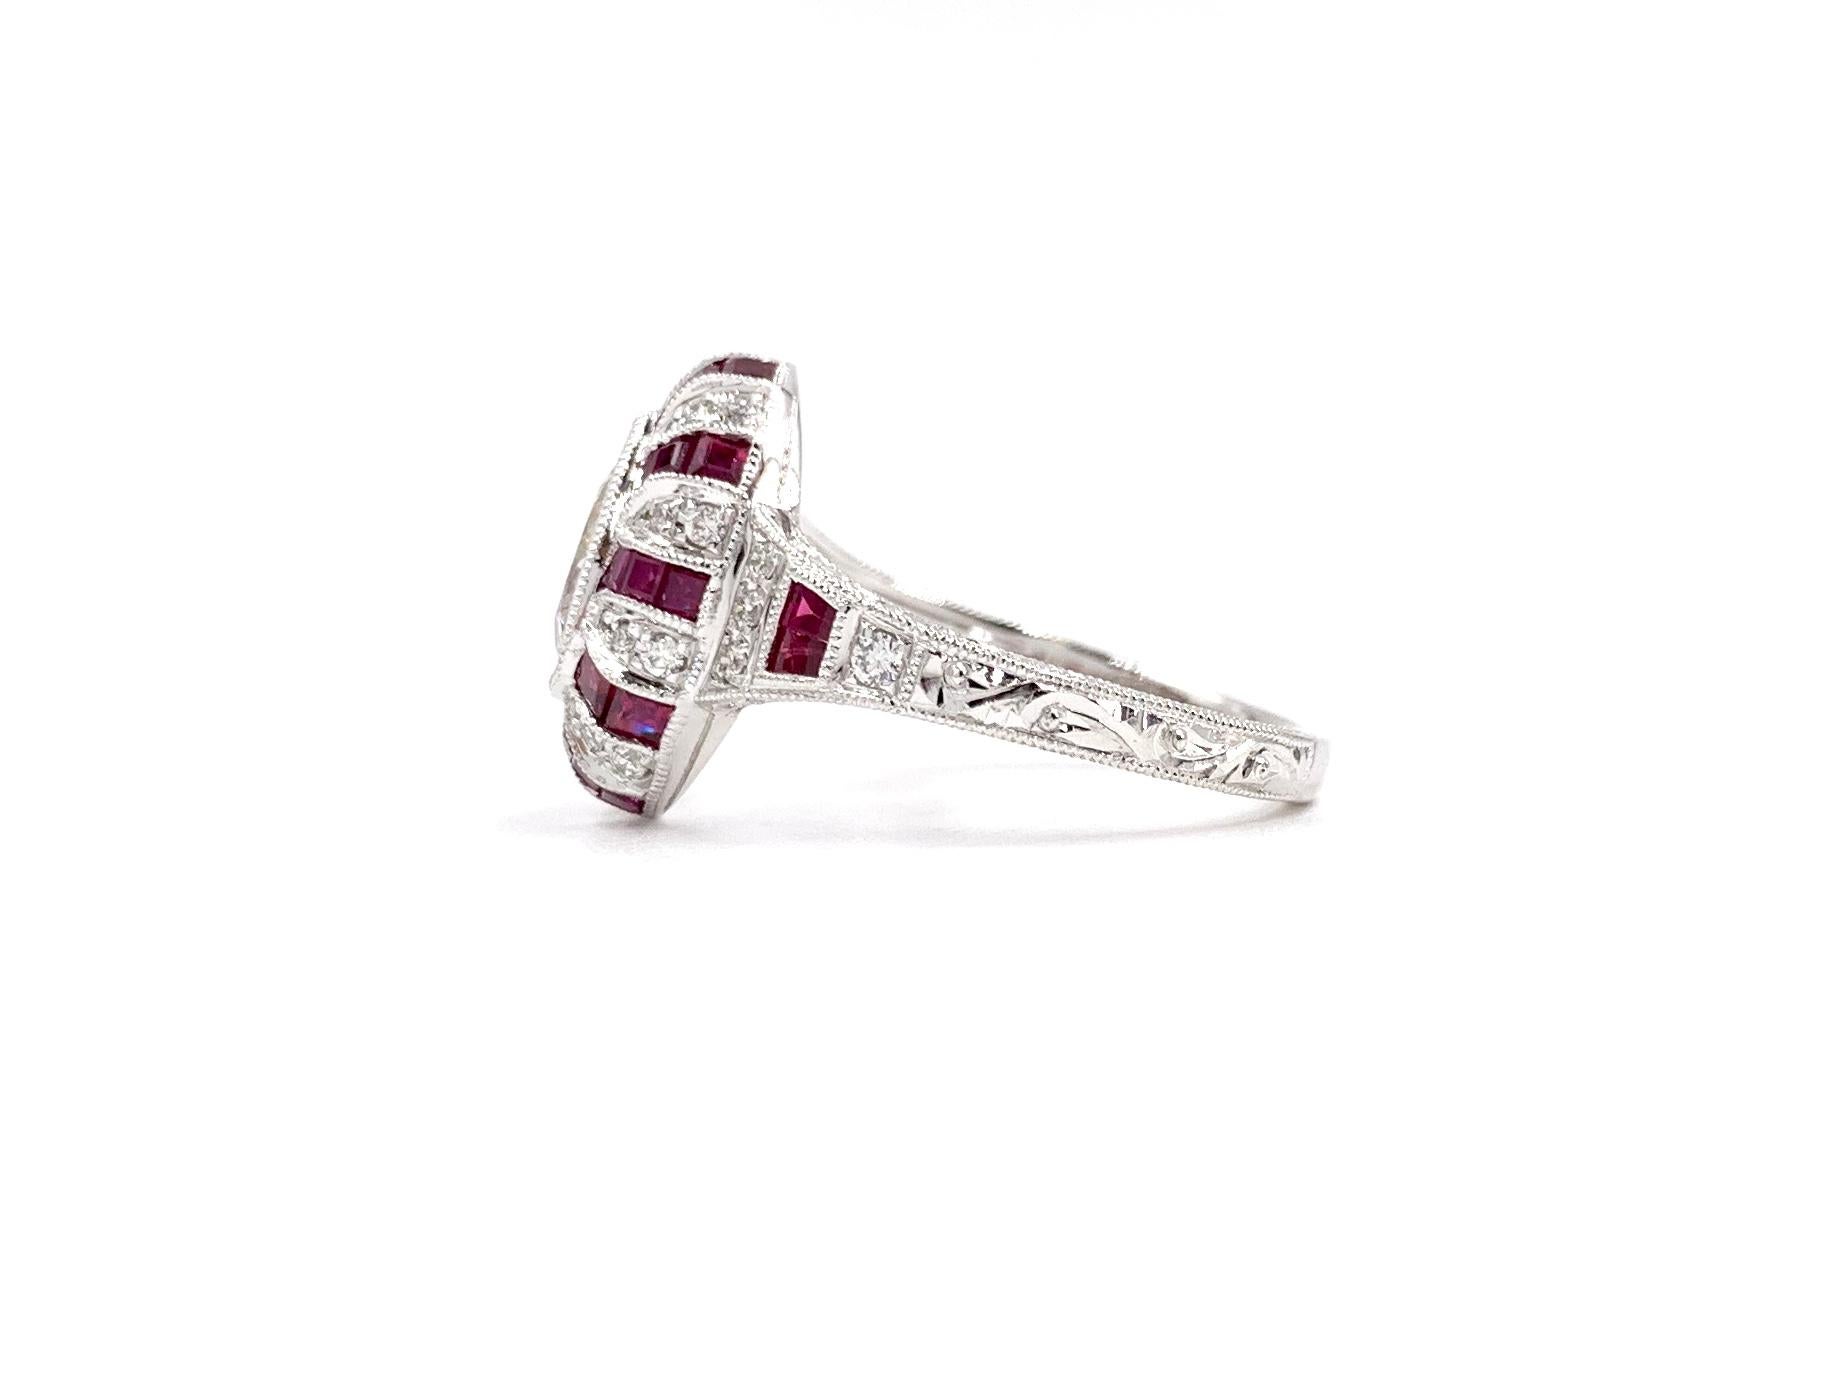 Women's Art Deco Inspired Pear Shape Diamond and Ruby Ring